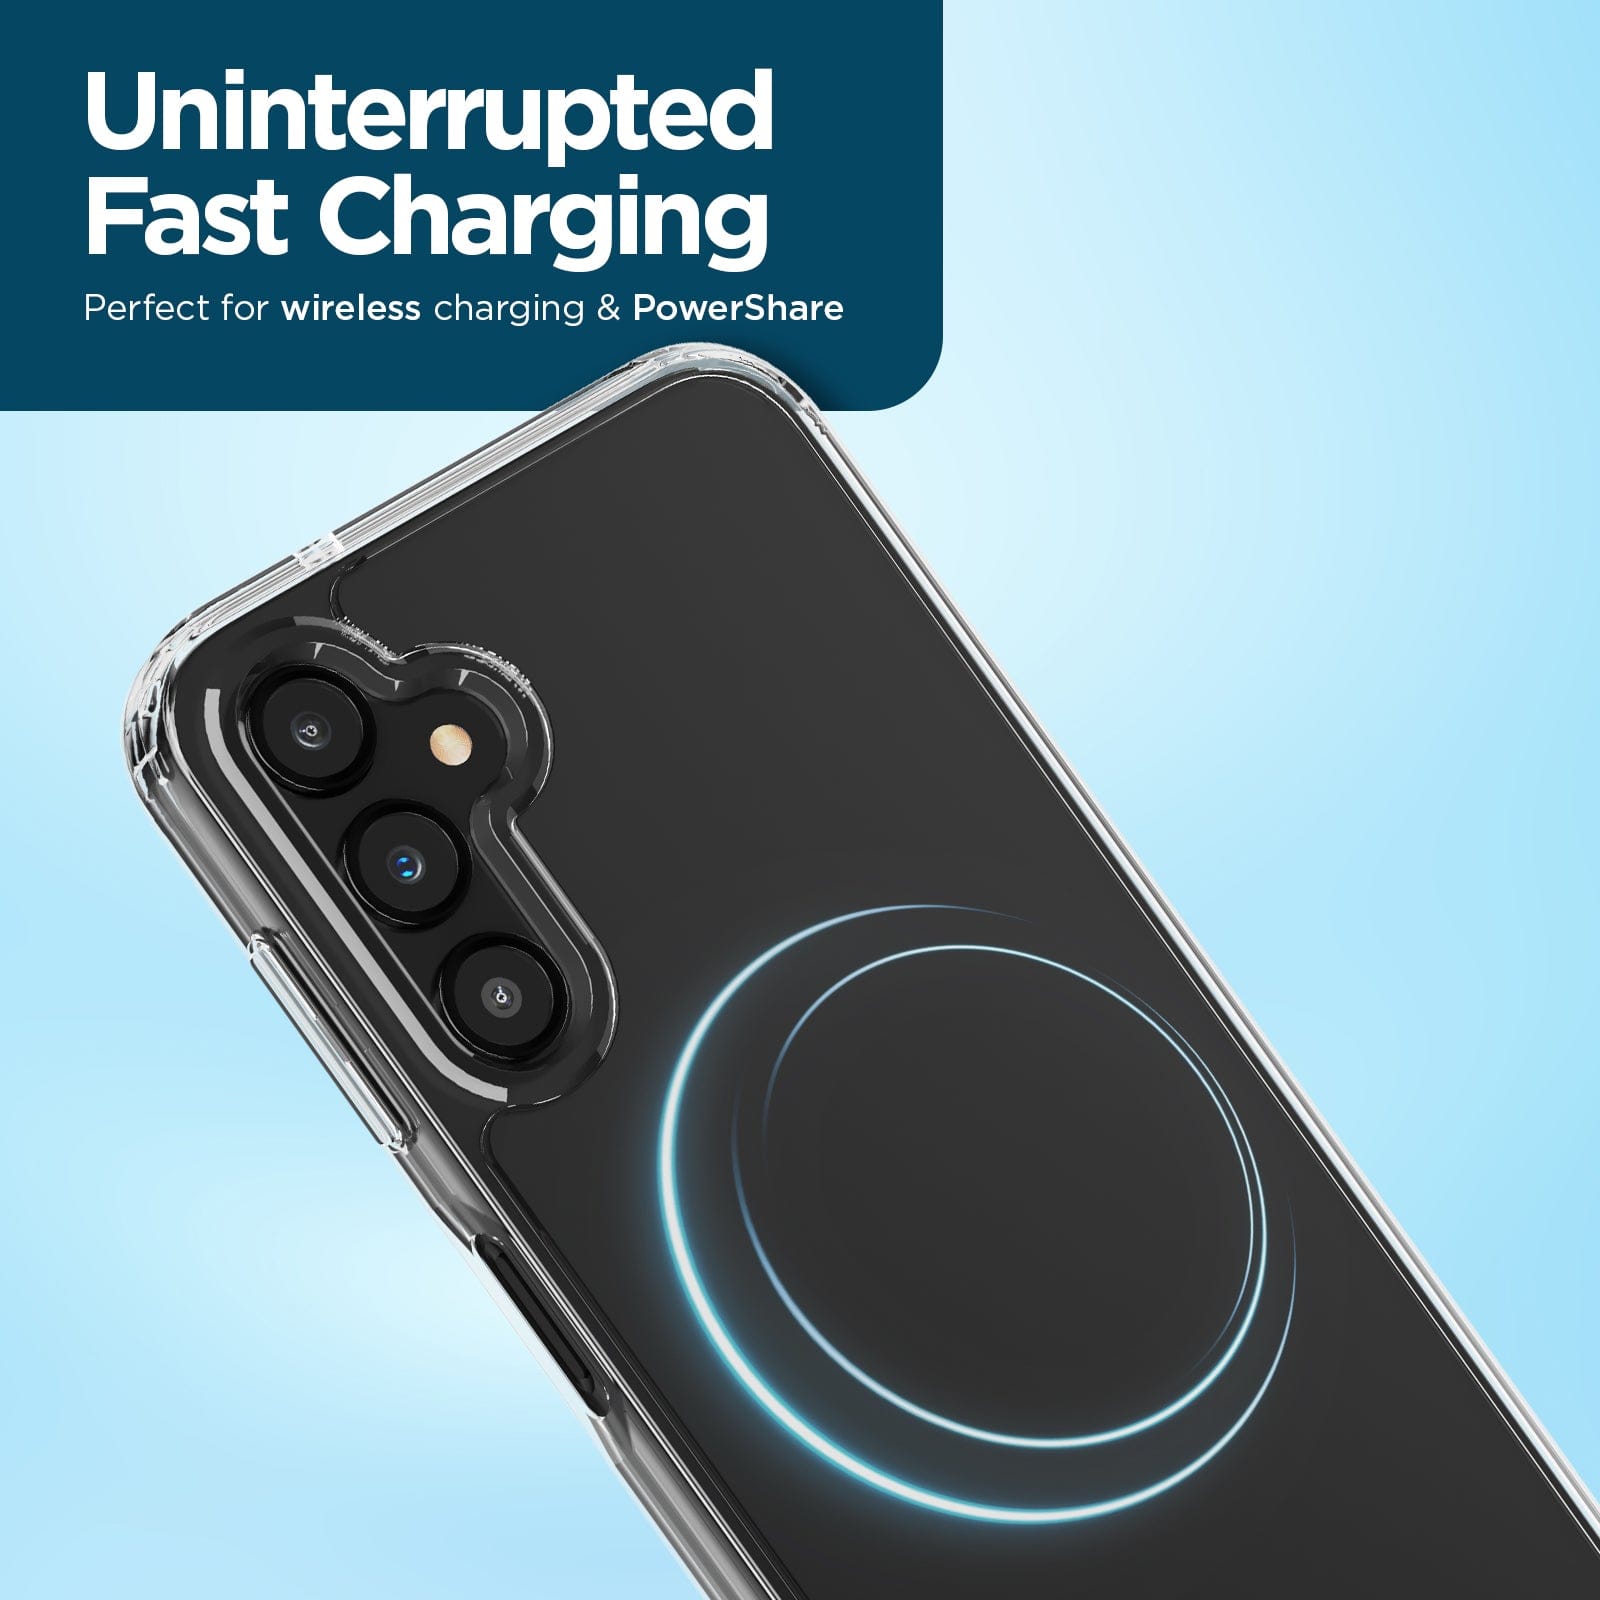 UNINTERRUPTED FAST CHARGING PERFECT FOR WIRELESS CHARGING AND POWERSHARE